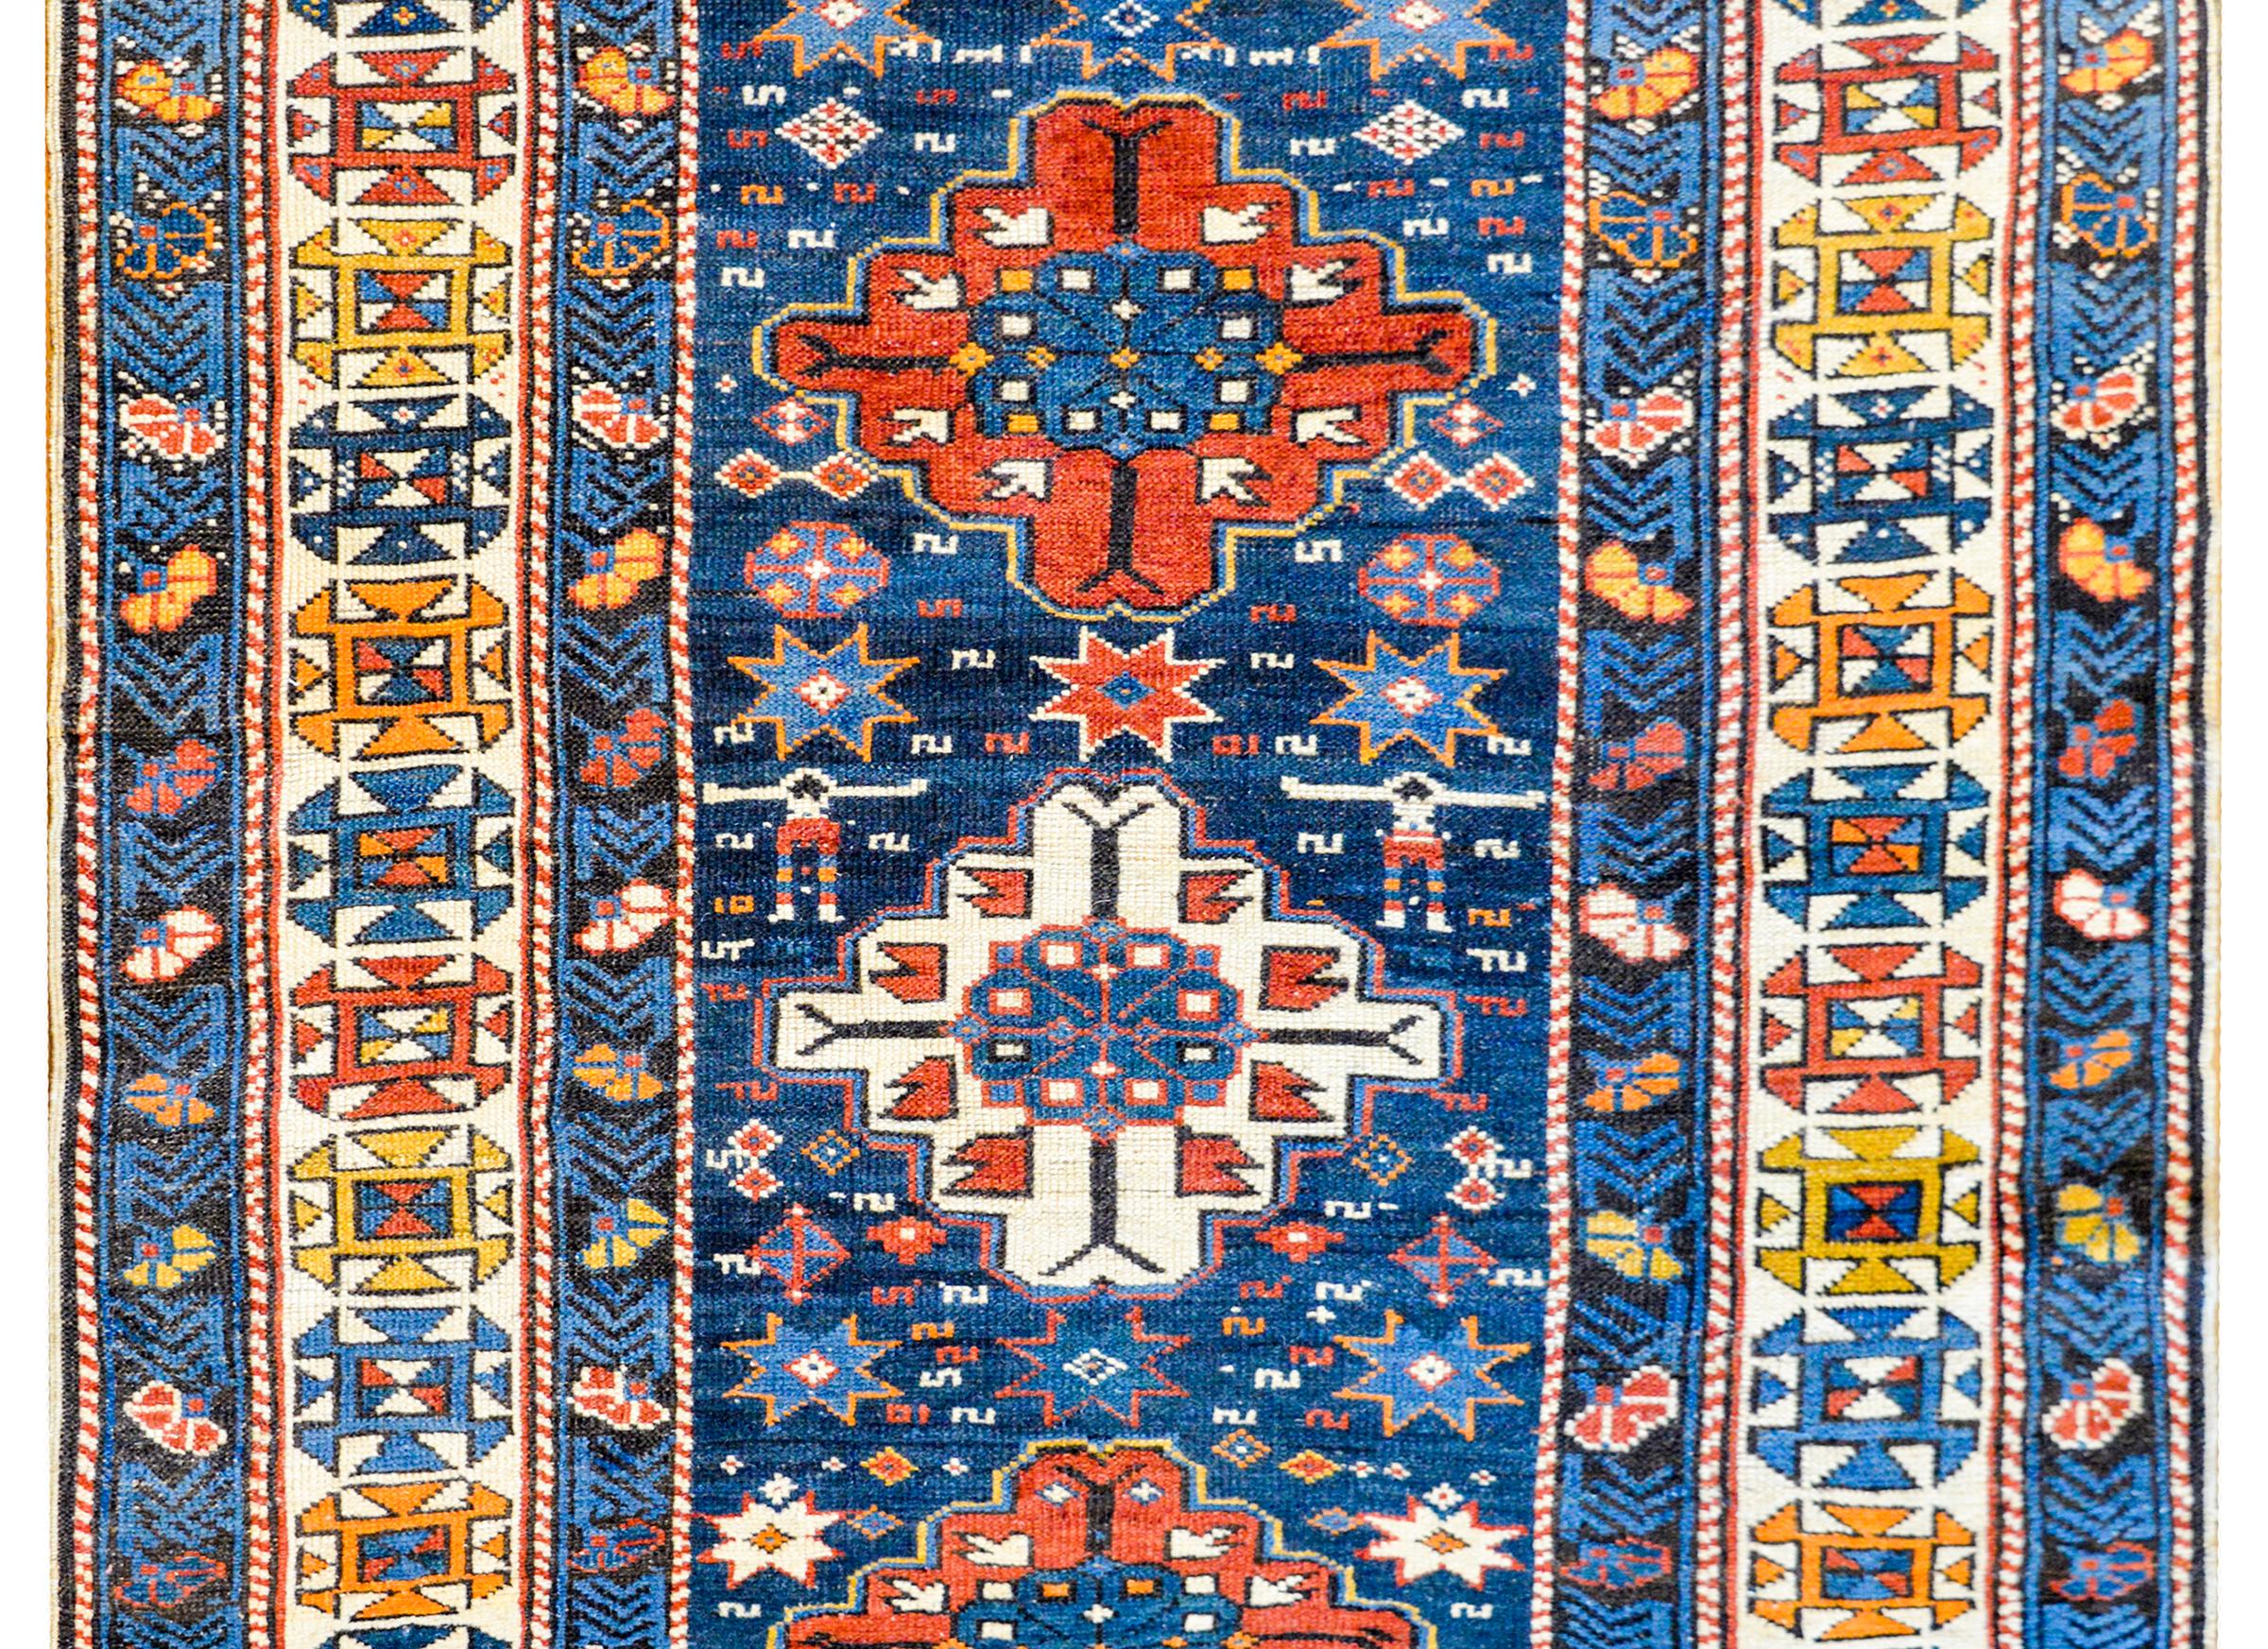 Early 20th century Azerbaijani Shirvan rug with three large stylized floral diamond medallions on an abrash indigo field of stylized flowers surrounded by a wonderful border containing a wide stylized floral patterned central stripe flanked by a